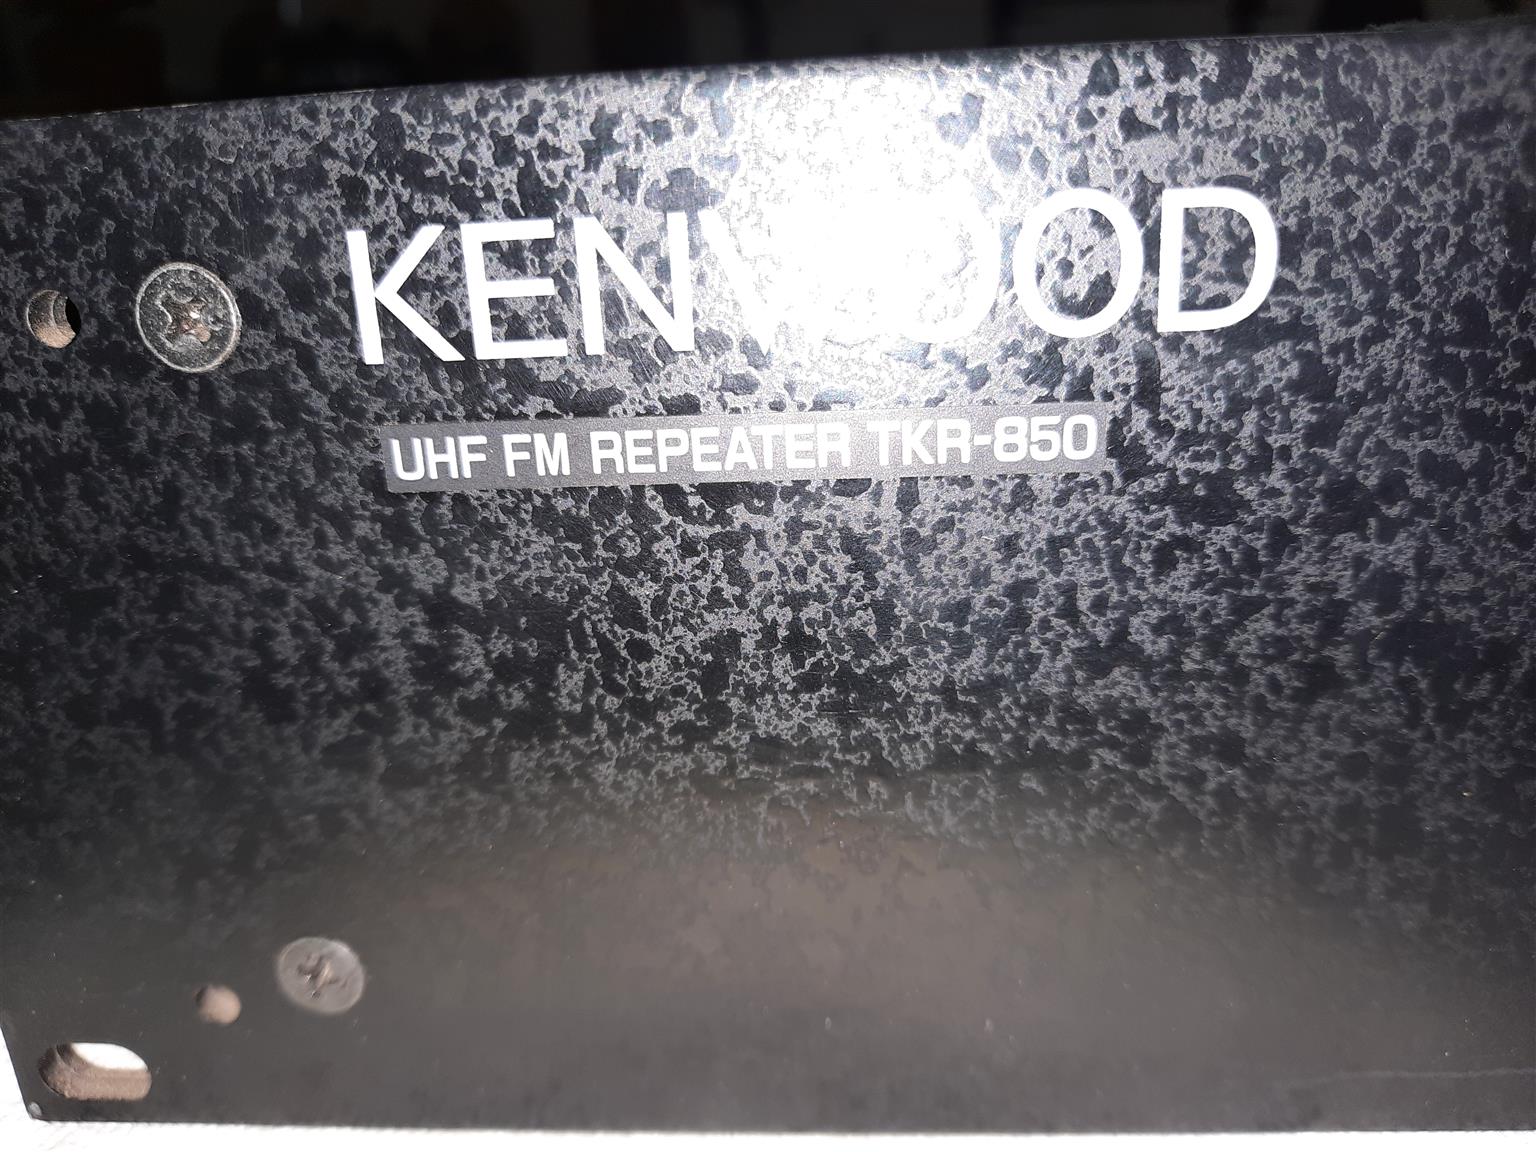 Kenwood TKR850 UHF Repeater for sale. Good working condition. 